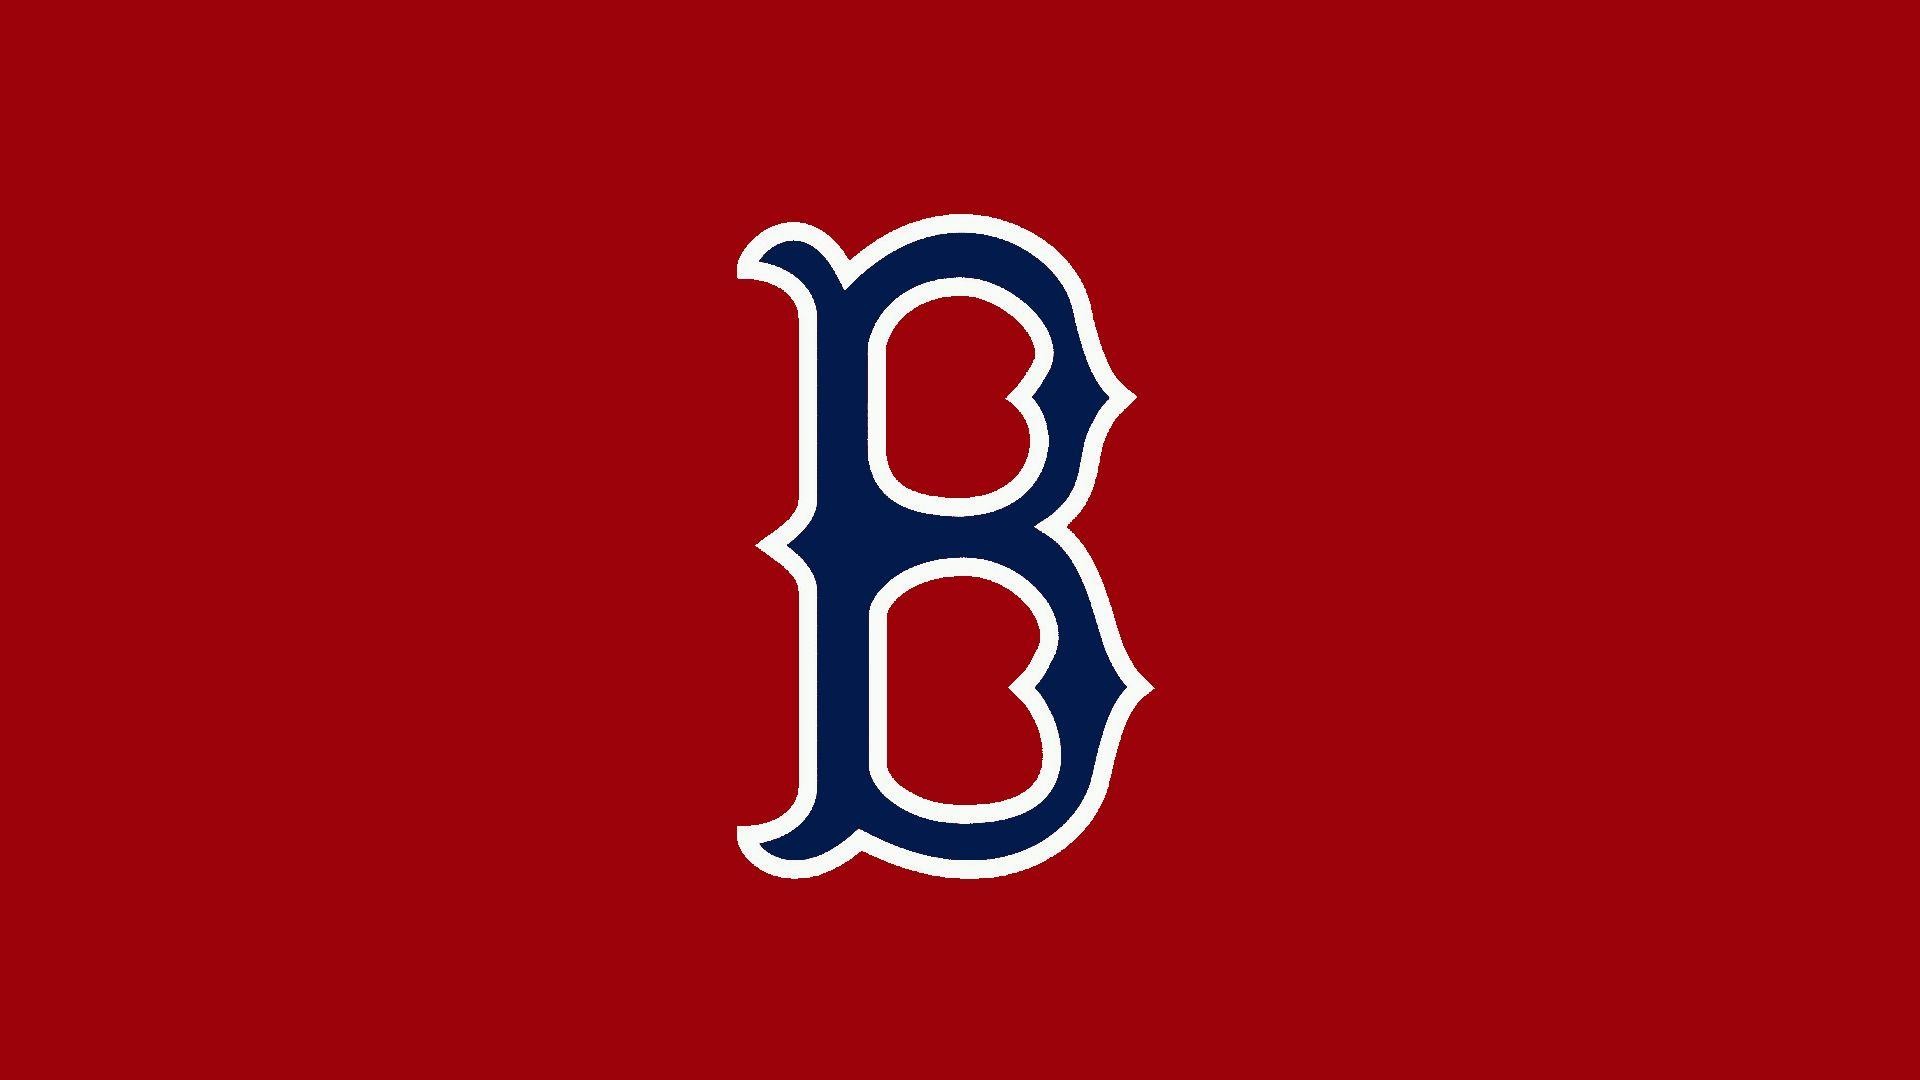 Red sox b logo with redbackground